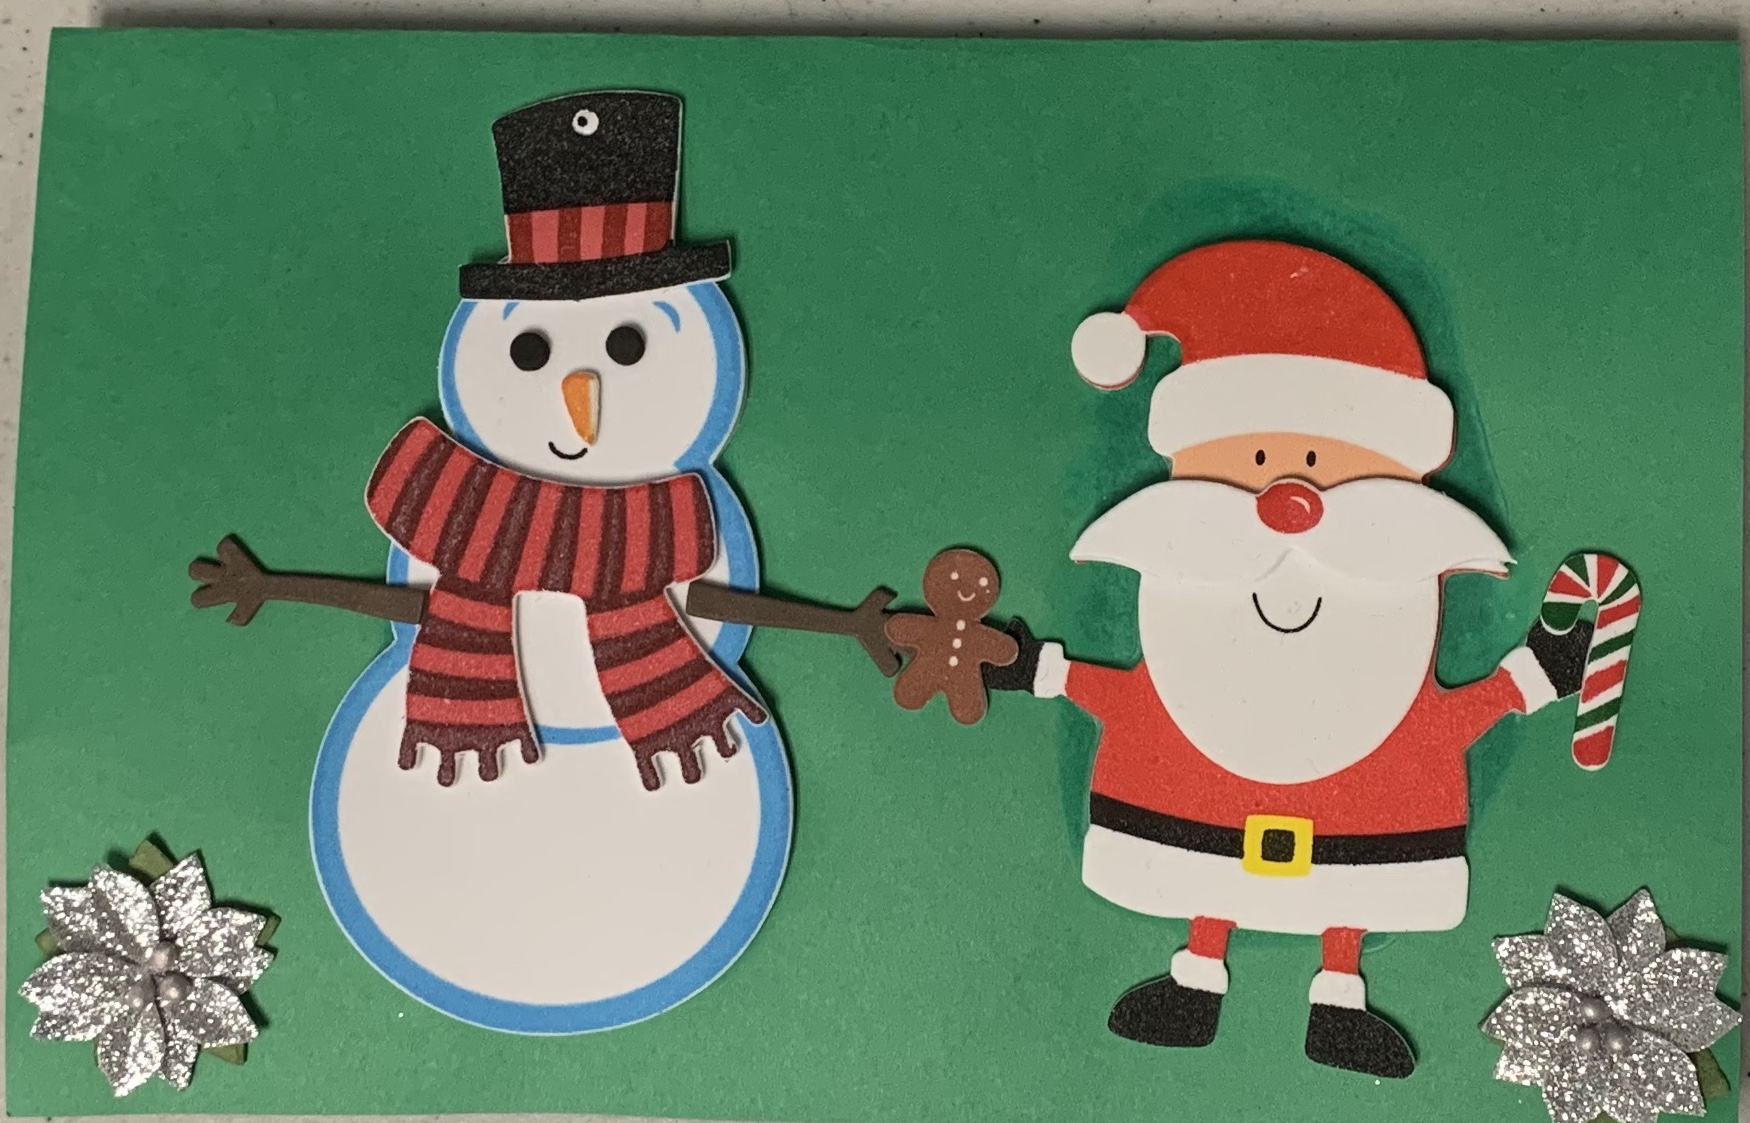 Christmas card with tactile snowman and Santa Claus